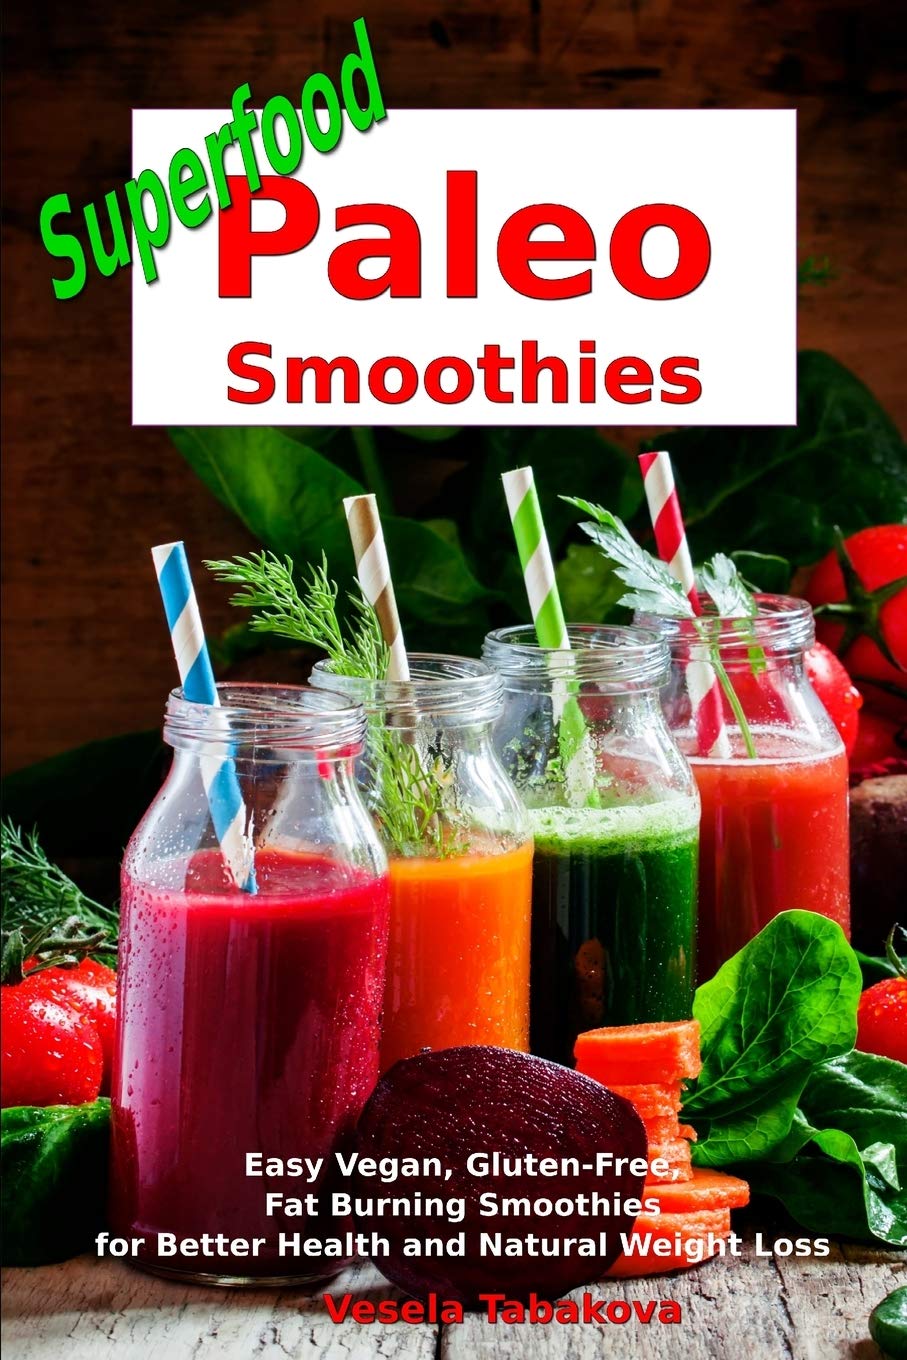 Superfood Paleo Smoothies: Easy Vegan, Gluten-Free, Fat Burning Smoothies for Better Health and Natural Weight Loss: Superfood Cookbook (Plant-Based Recipes For Everyday)